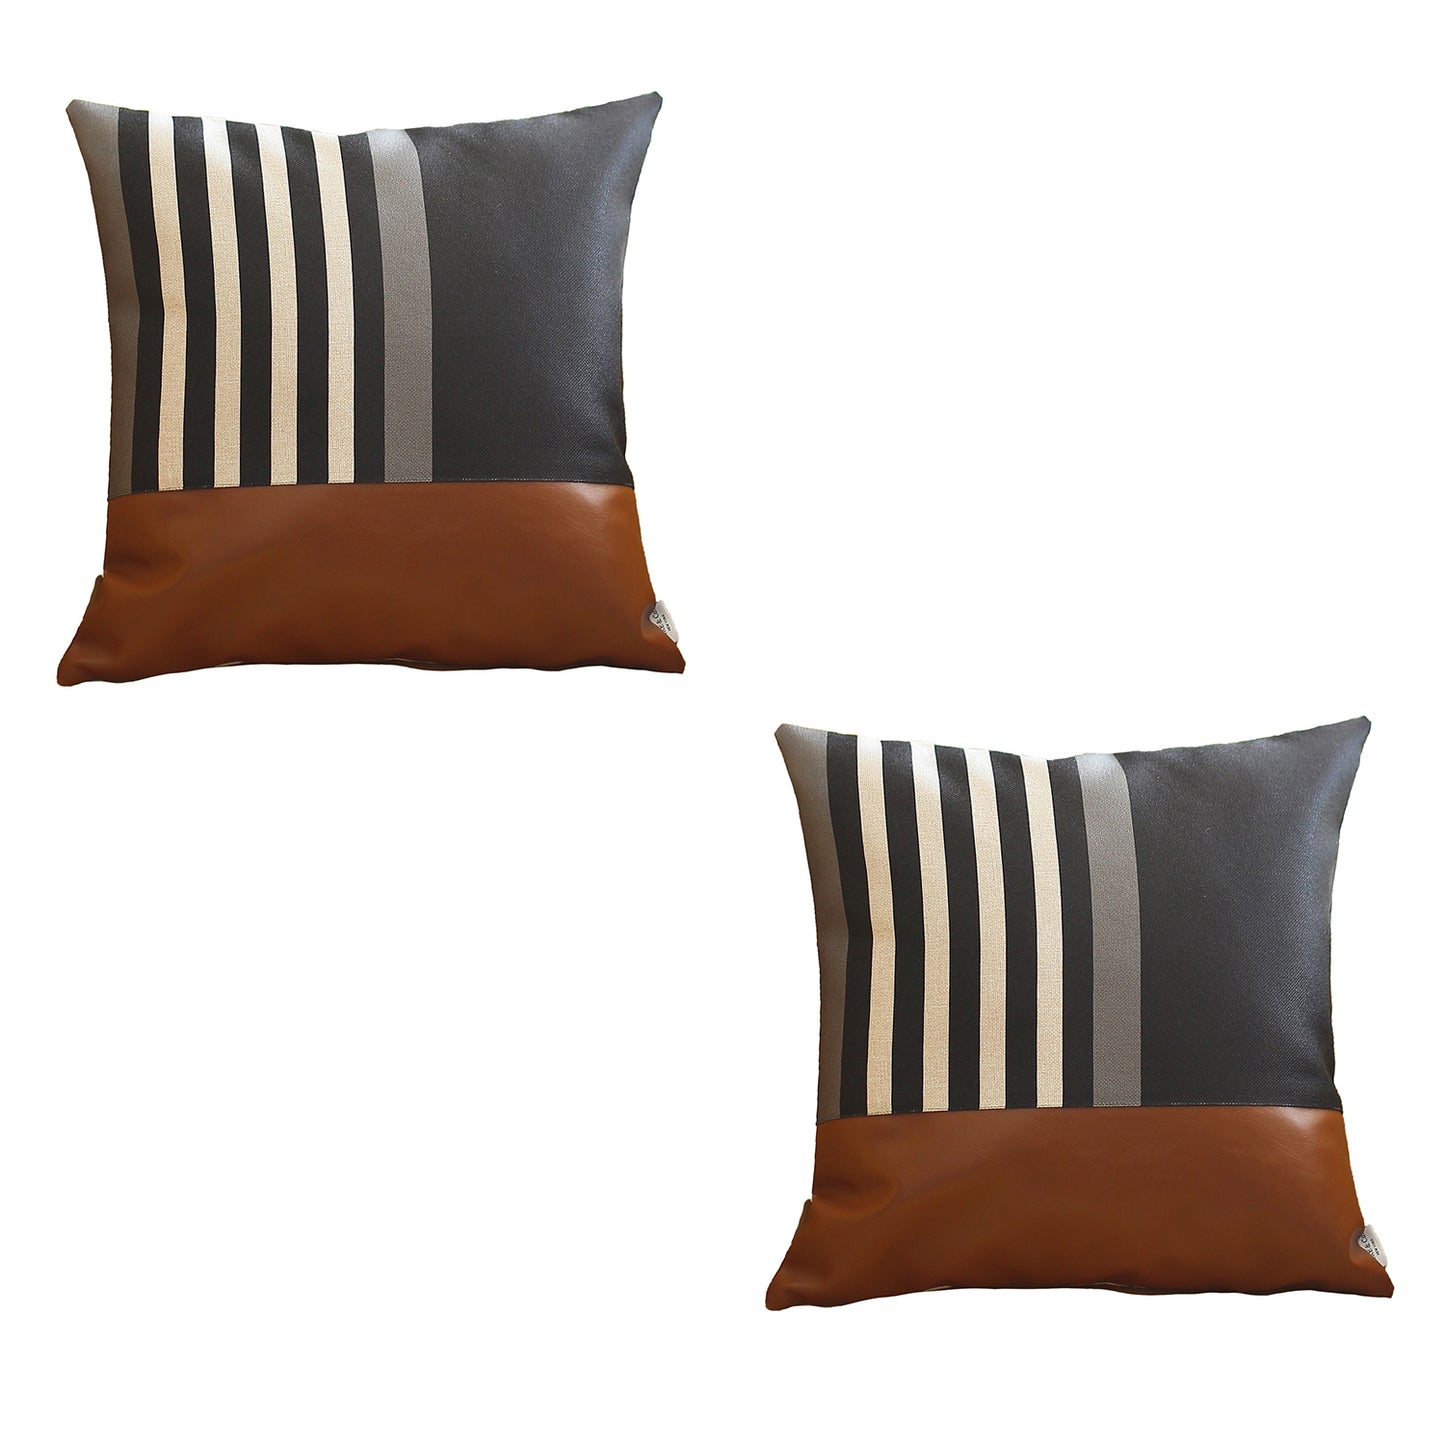 Boho-Chic Set of 2 Handcrafted Decorative Throw Pillow Cover Vegan Faux Leather Geometric Pillowcase for Couch, Bedding